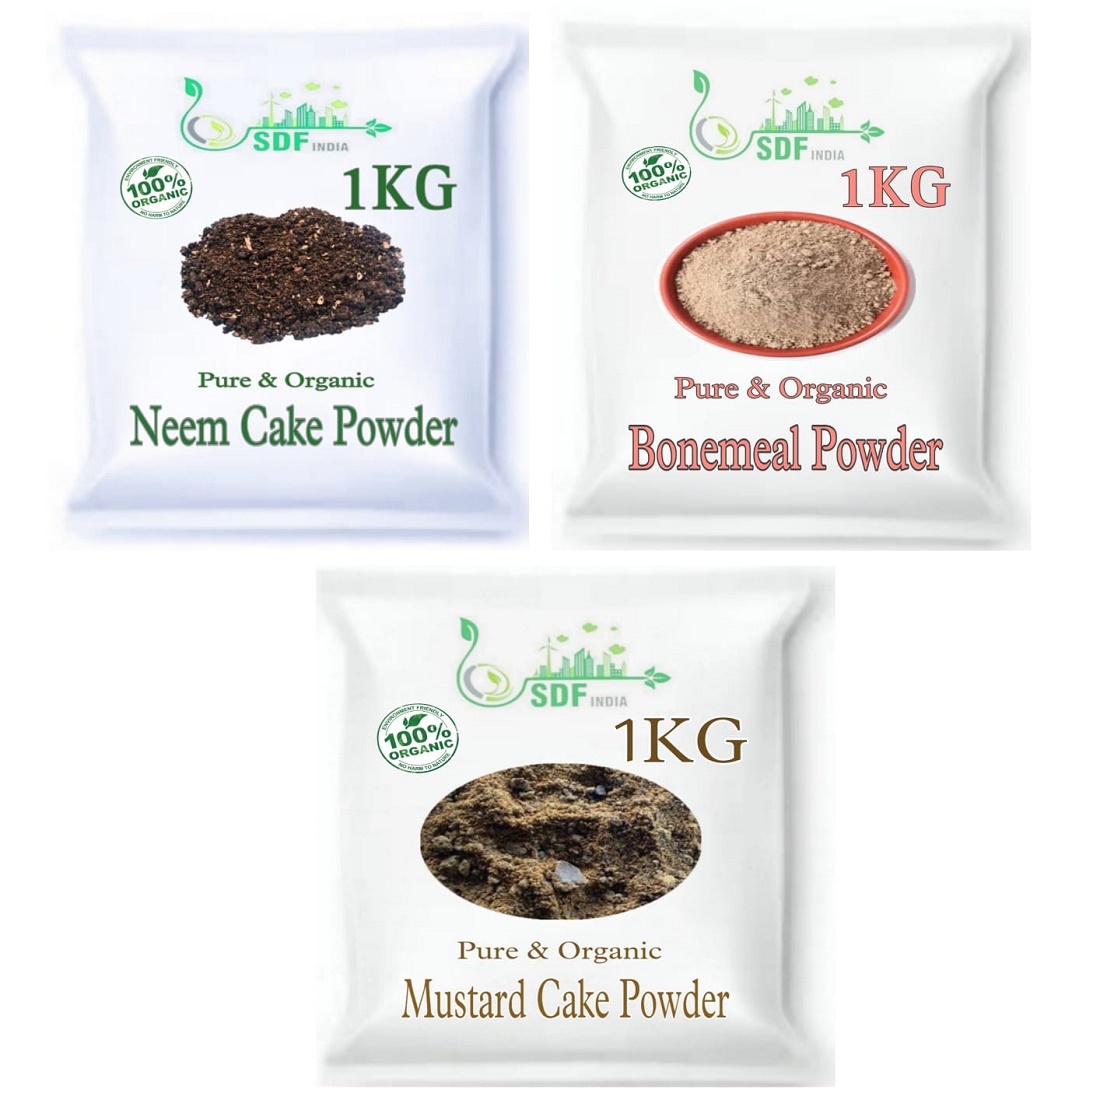 SDFindia Combo Pack Of 3 ( 1 kg Bonemeal Powder/ 1 kg Mustard Oil Cake Powder / 1 kg Neem Oil Cake Powder)